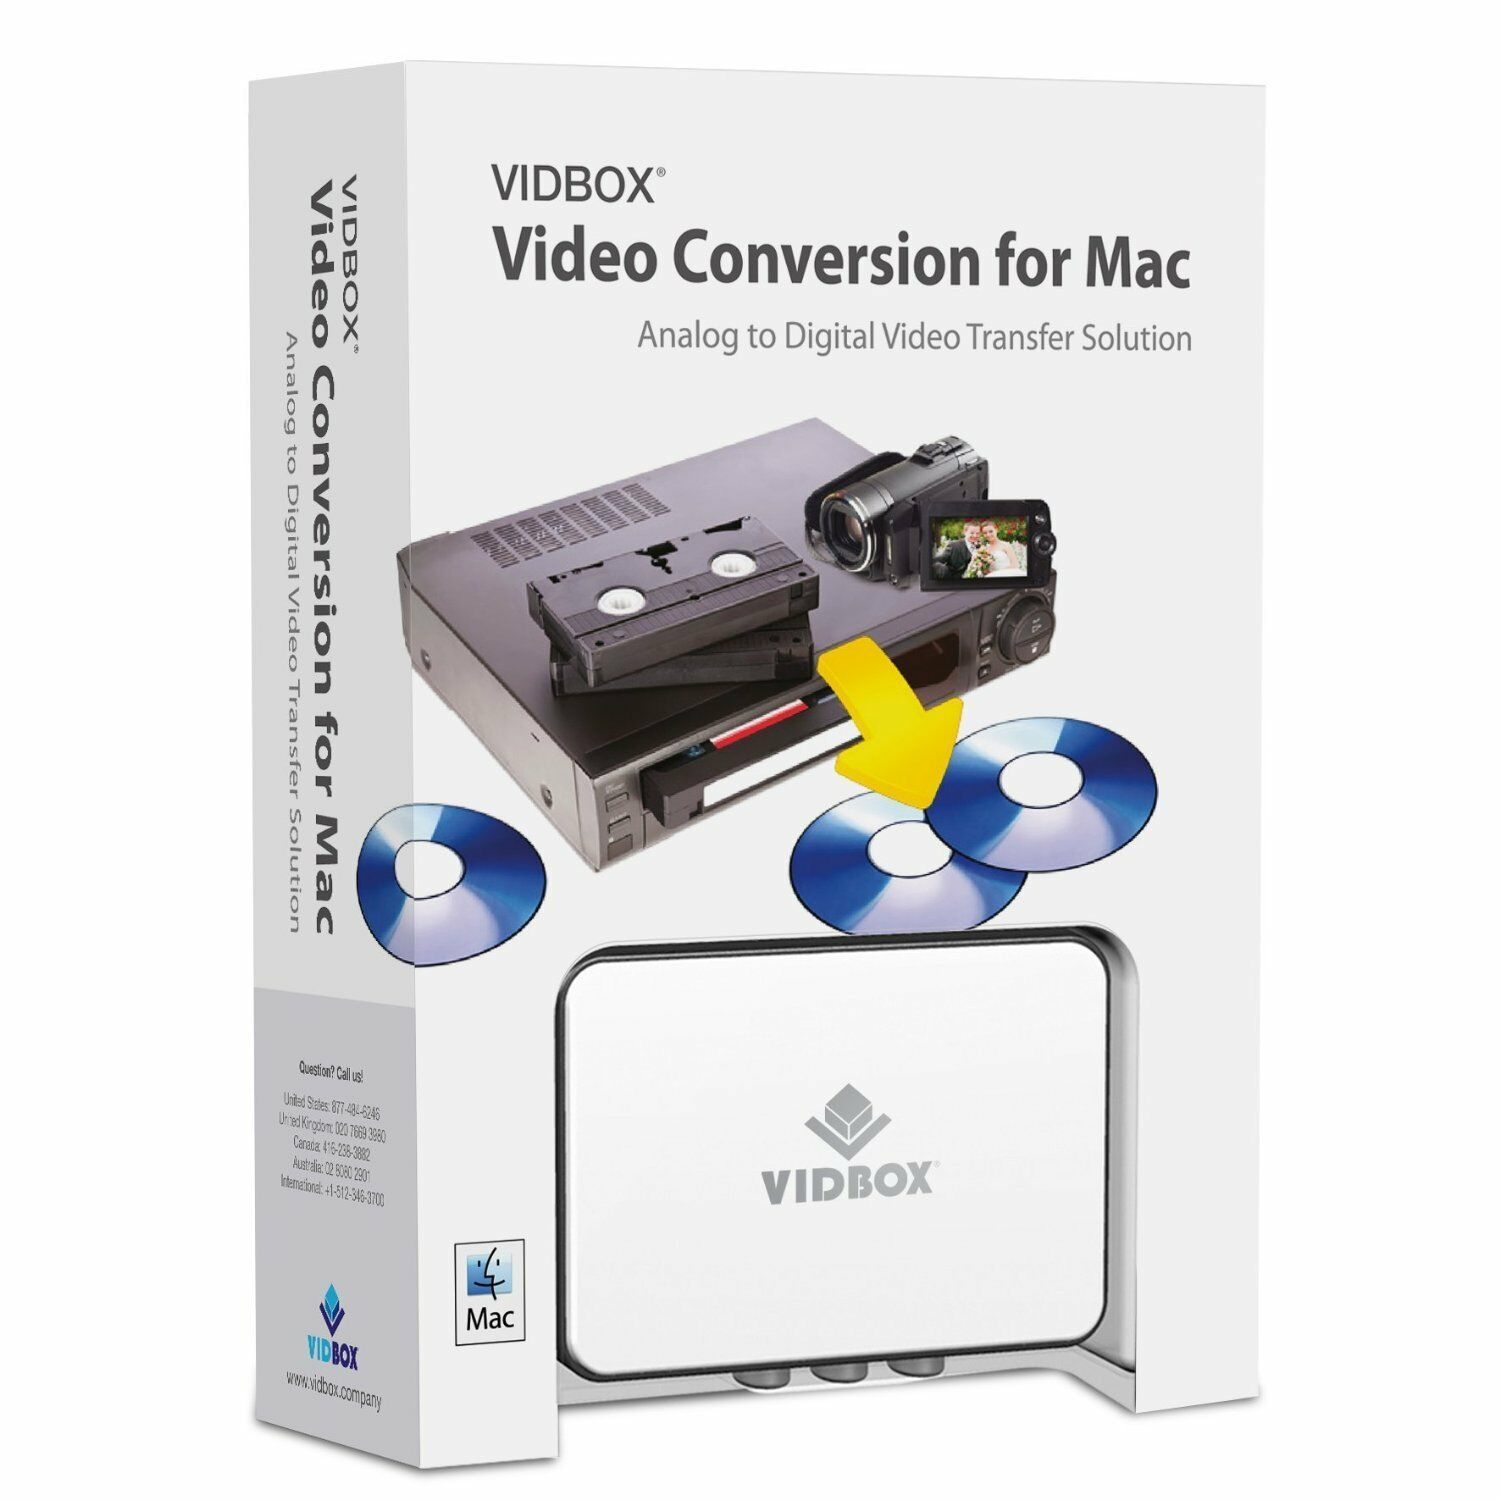 8mm tapes to dvd converter